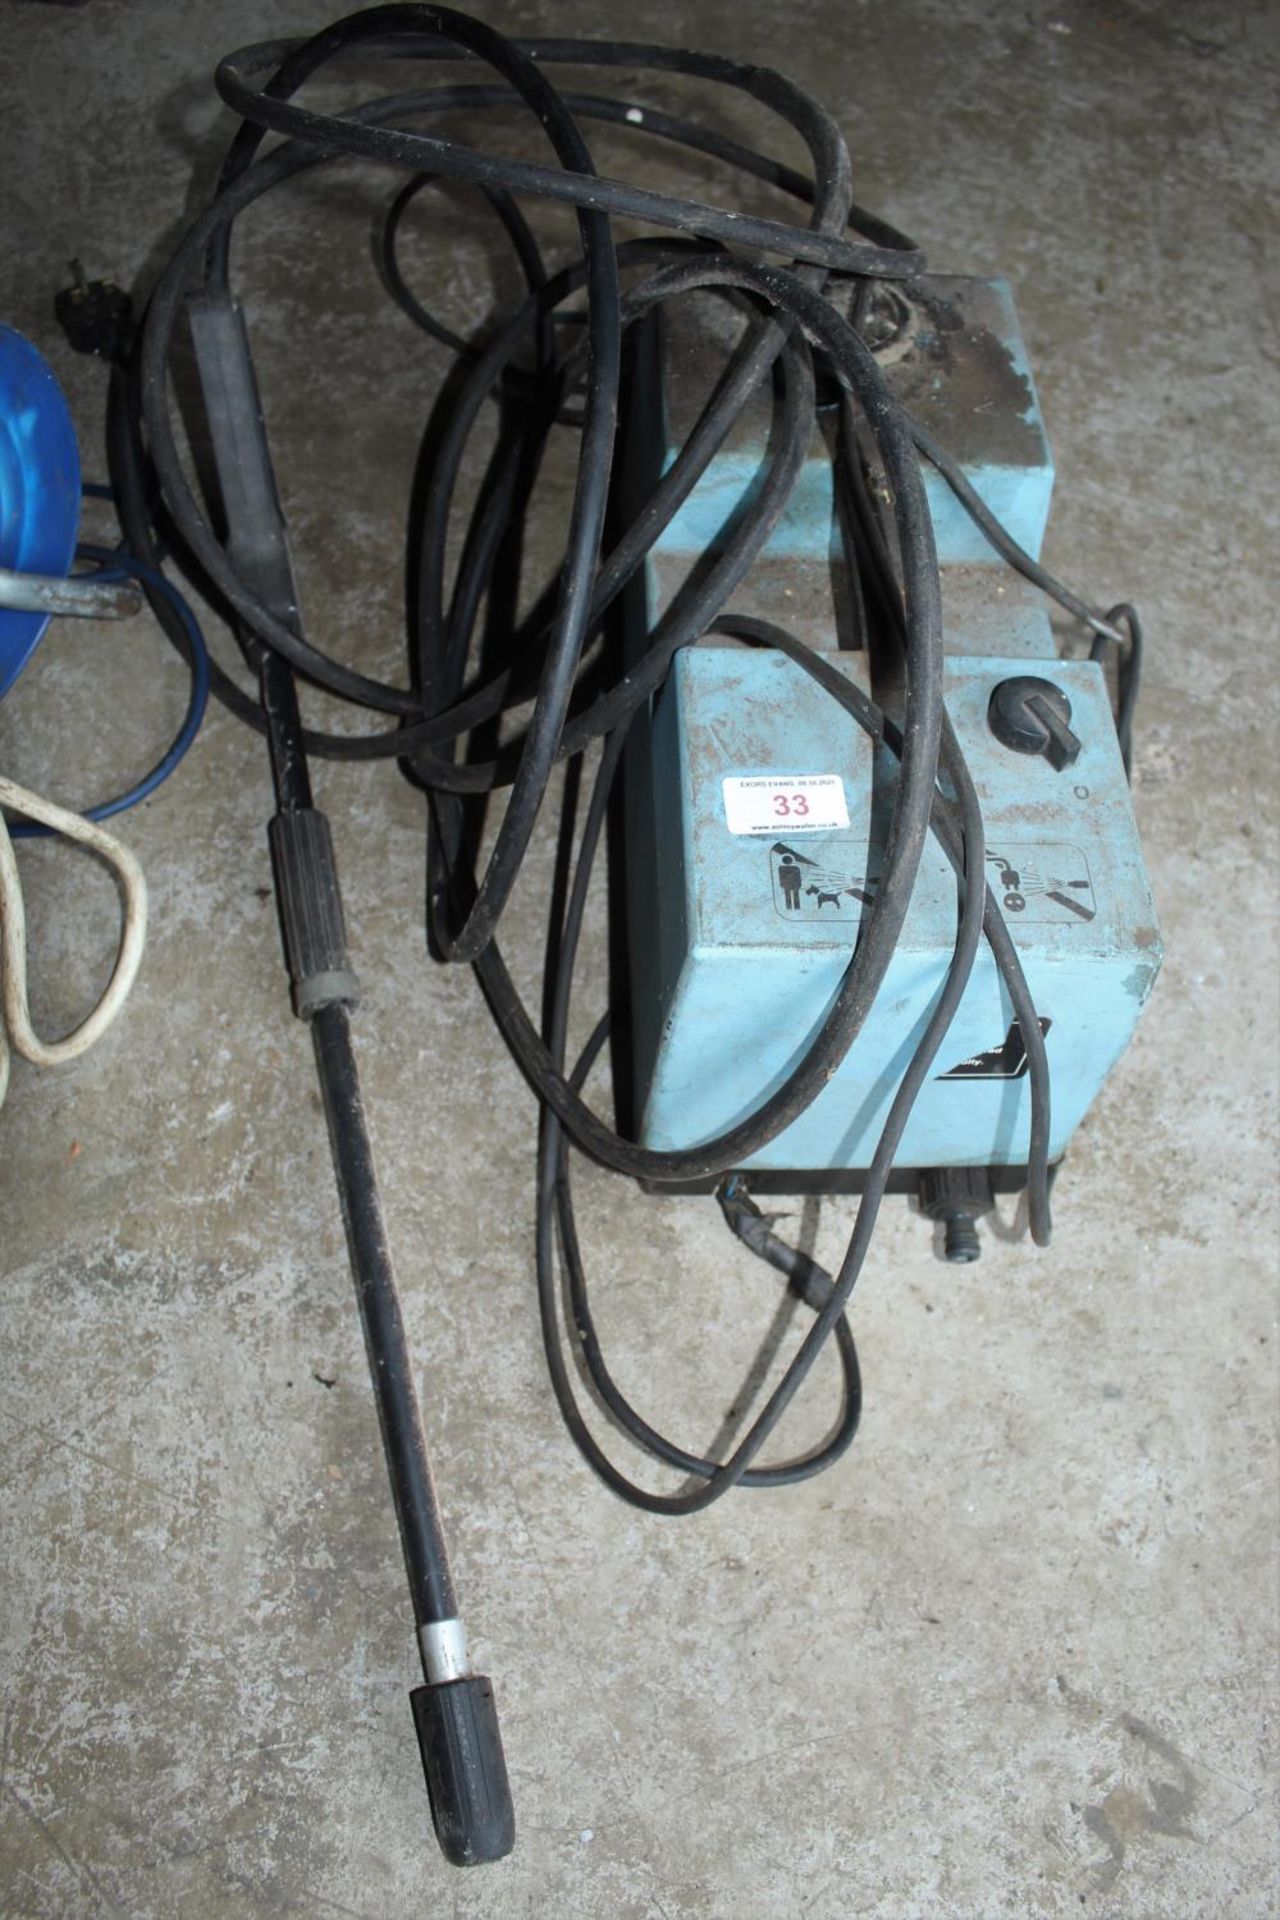 A POWER WASHER